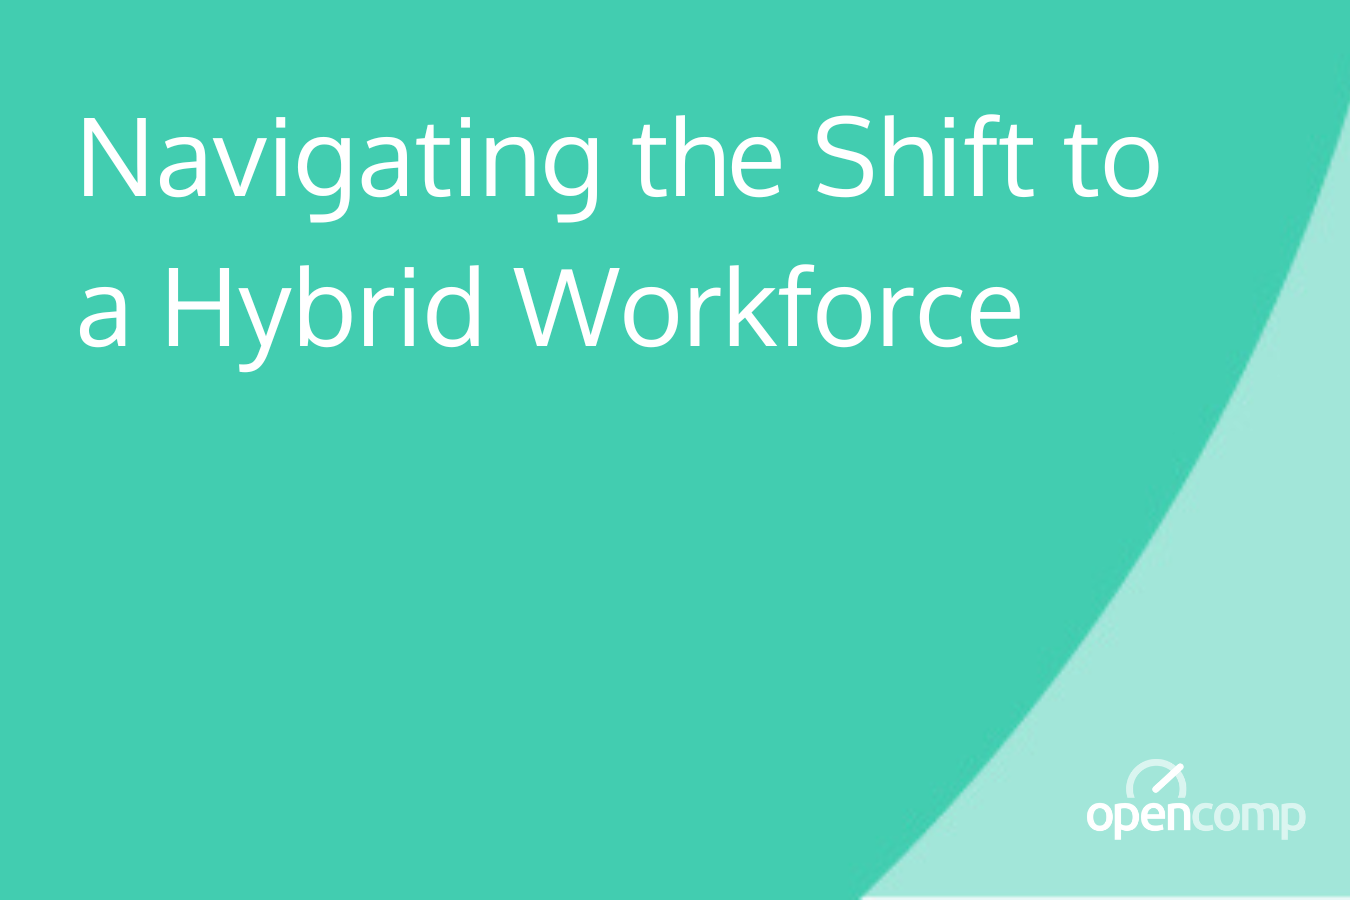 Navigating the Shift to a Hybrid Workforce